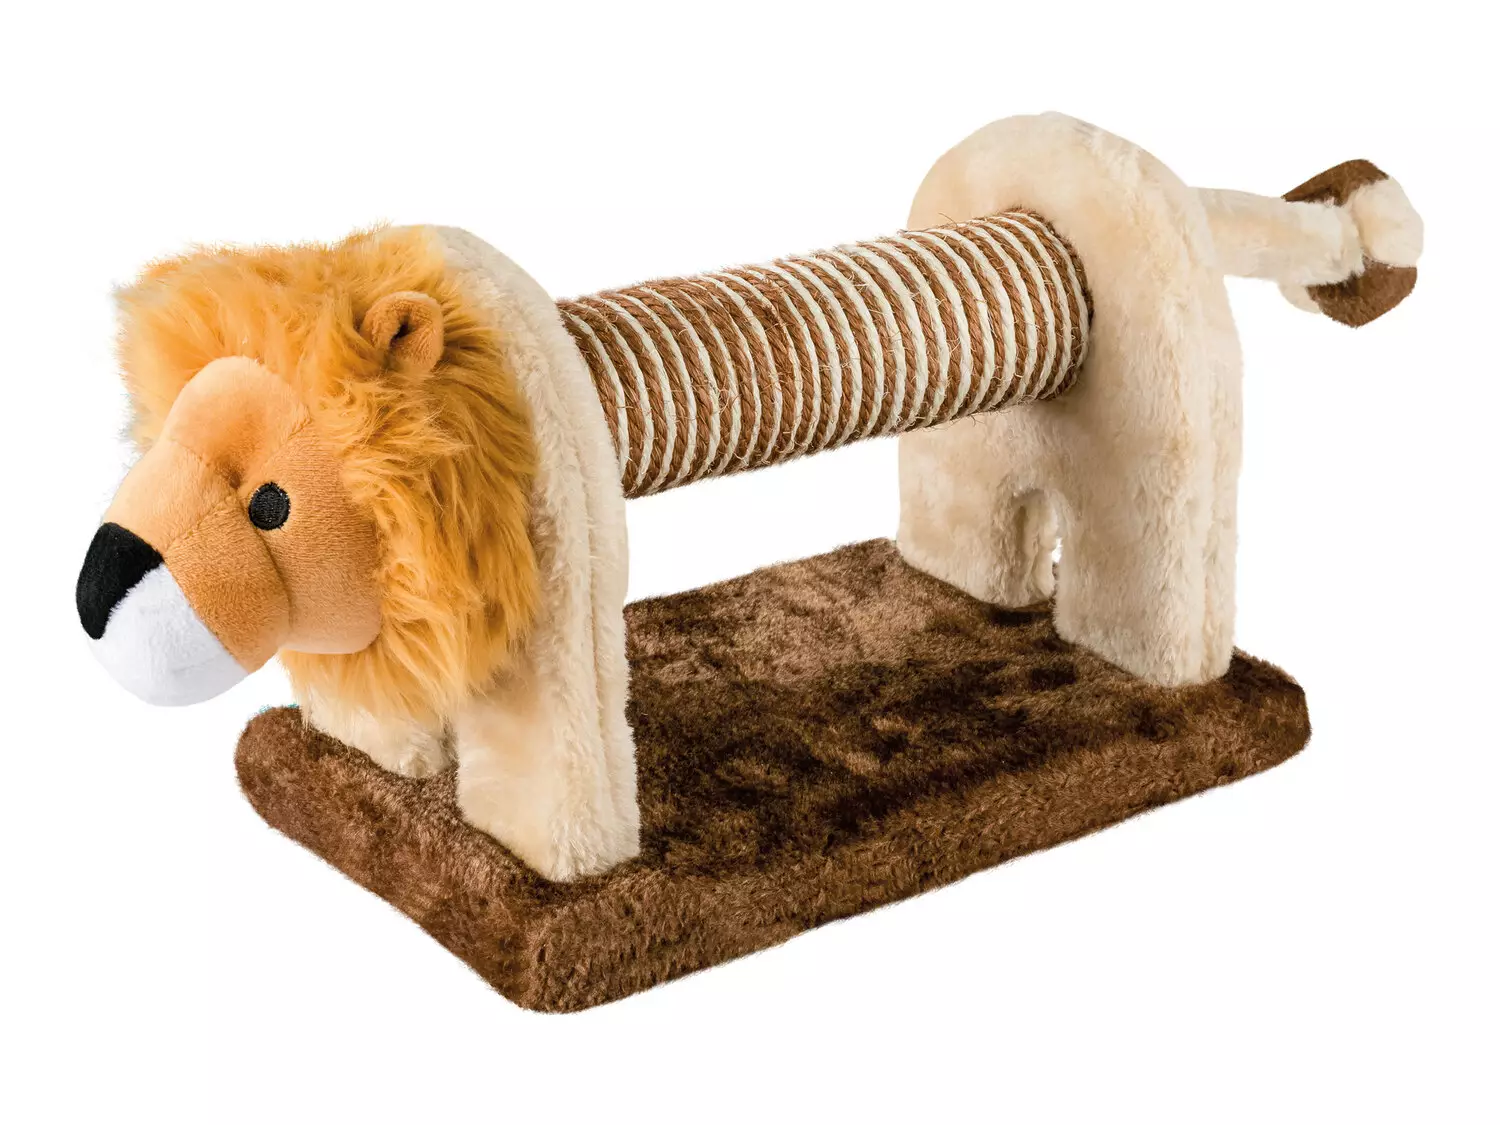 Make your tabby feel like Mufasa with this lion-shaped Cat Scratching Post for £7.99 (